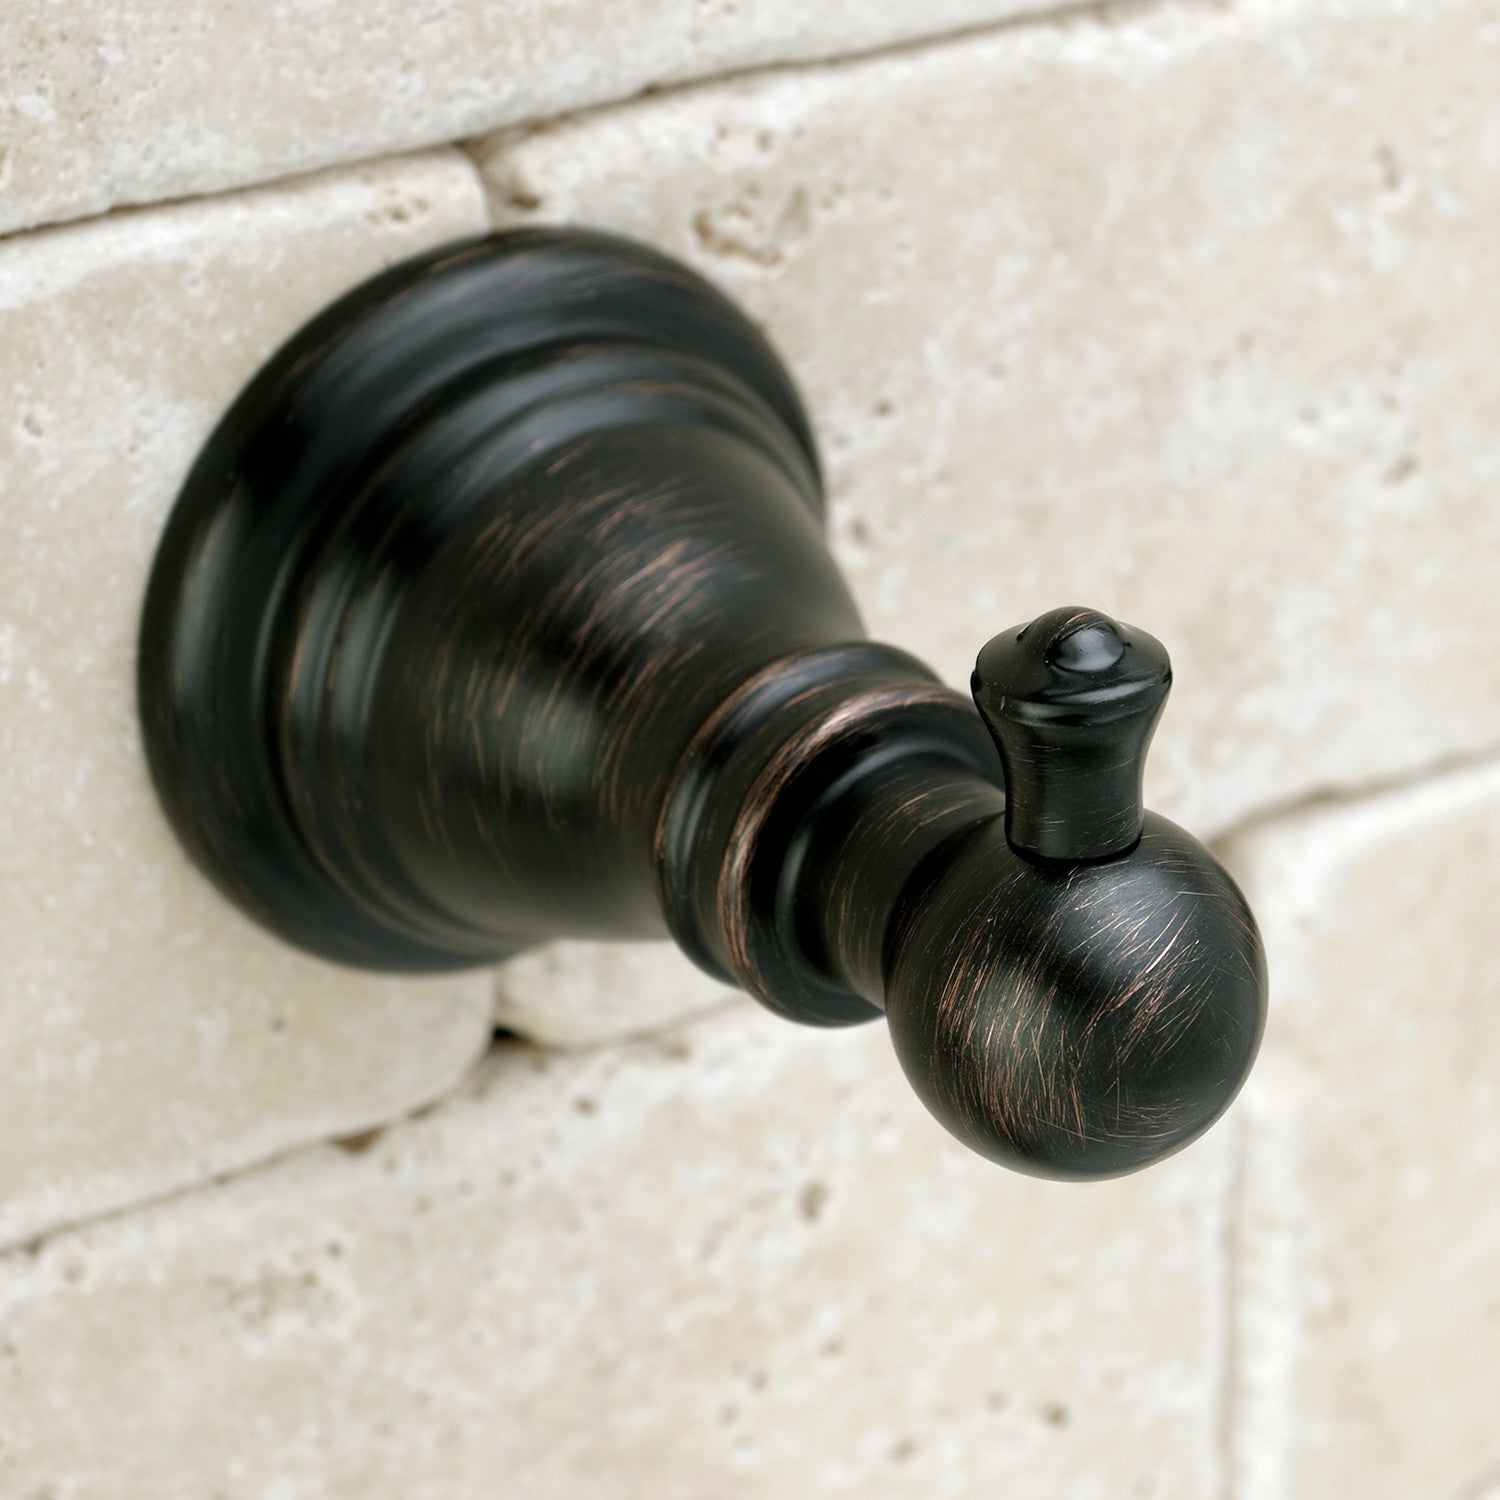 BWE Zinc Traditional Bathroom Double Towel and Robe Hook in Oil Rubbed  Bronze at